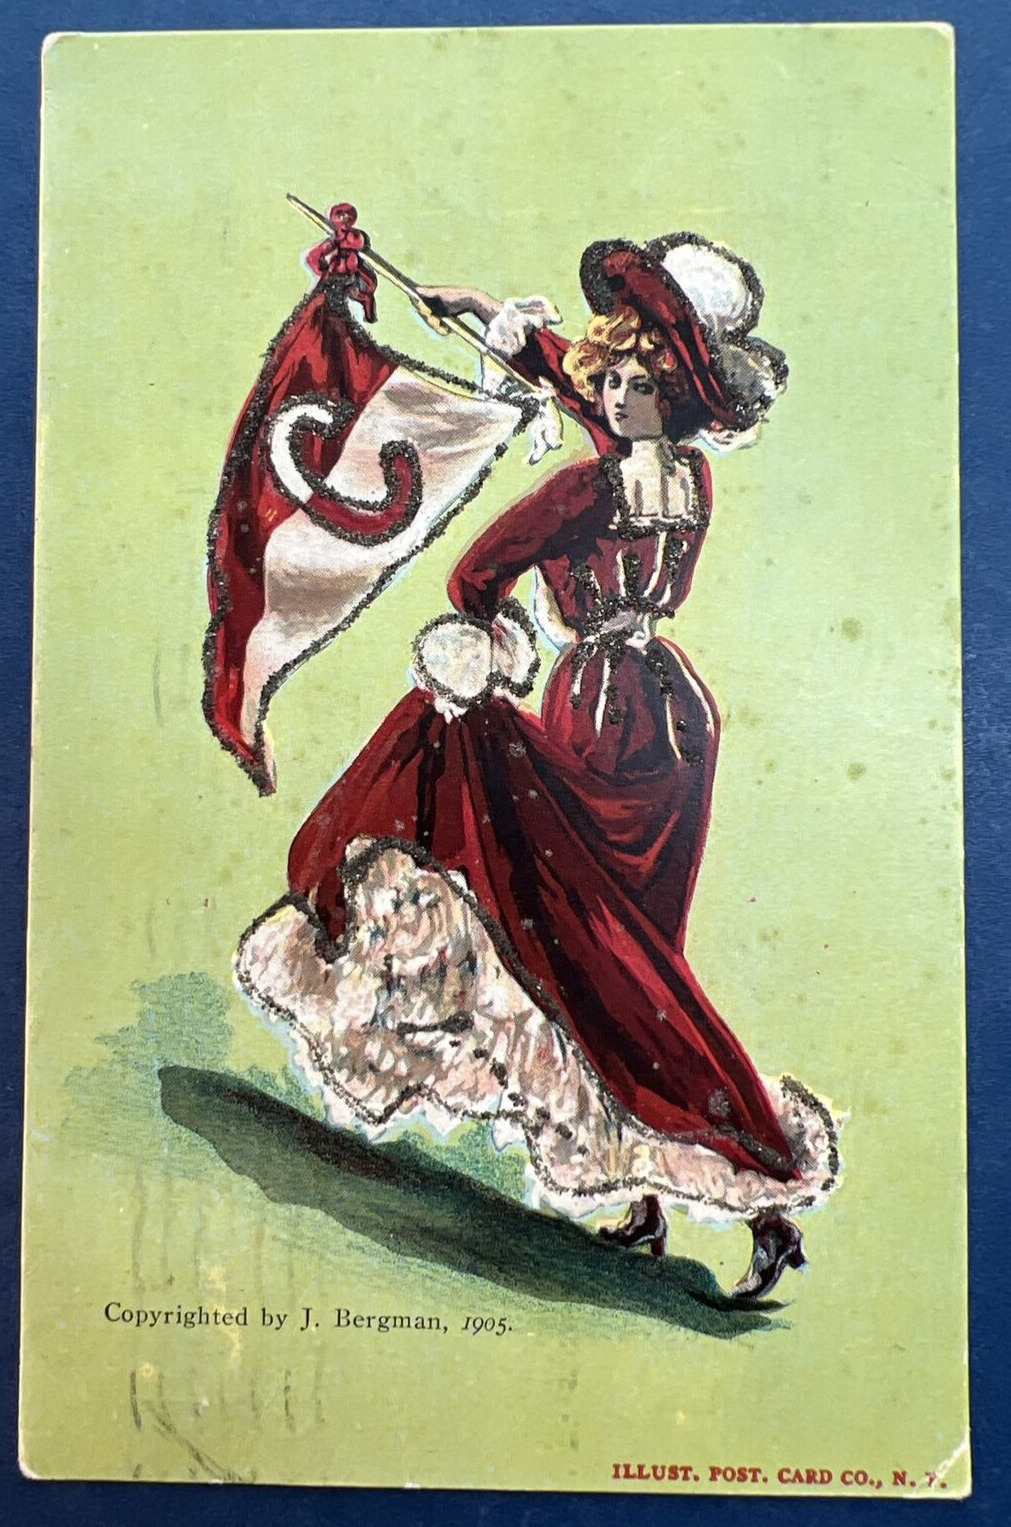 University Lady Single Greetings Antique Postcard.Glitter 1905. PUBL:Illustrated